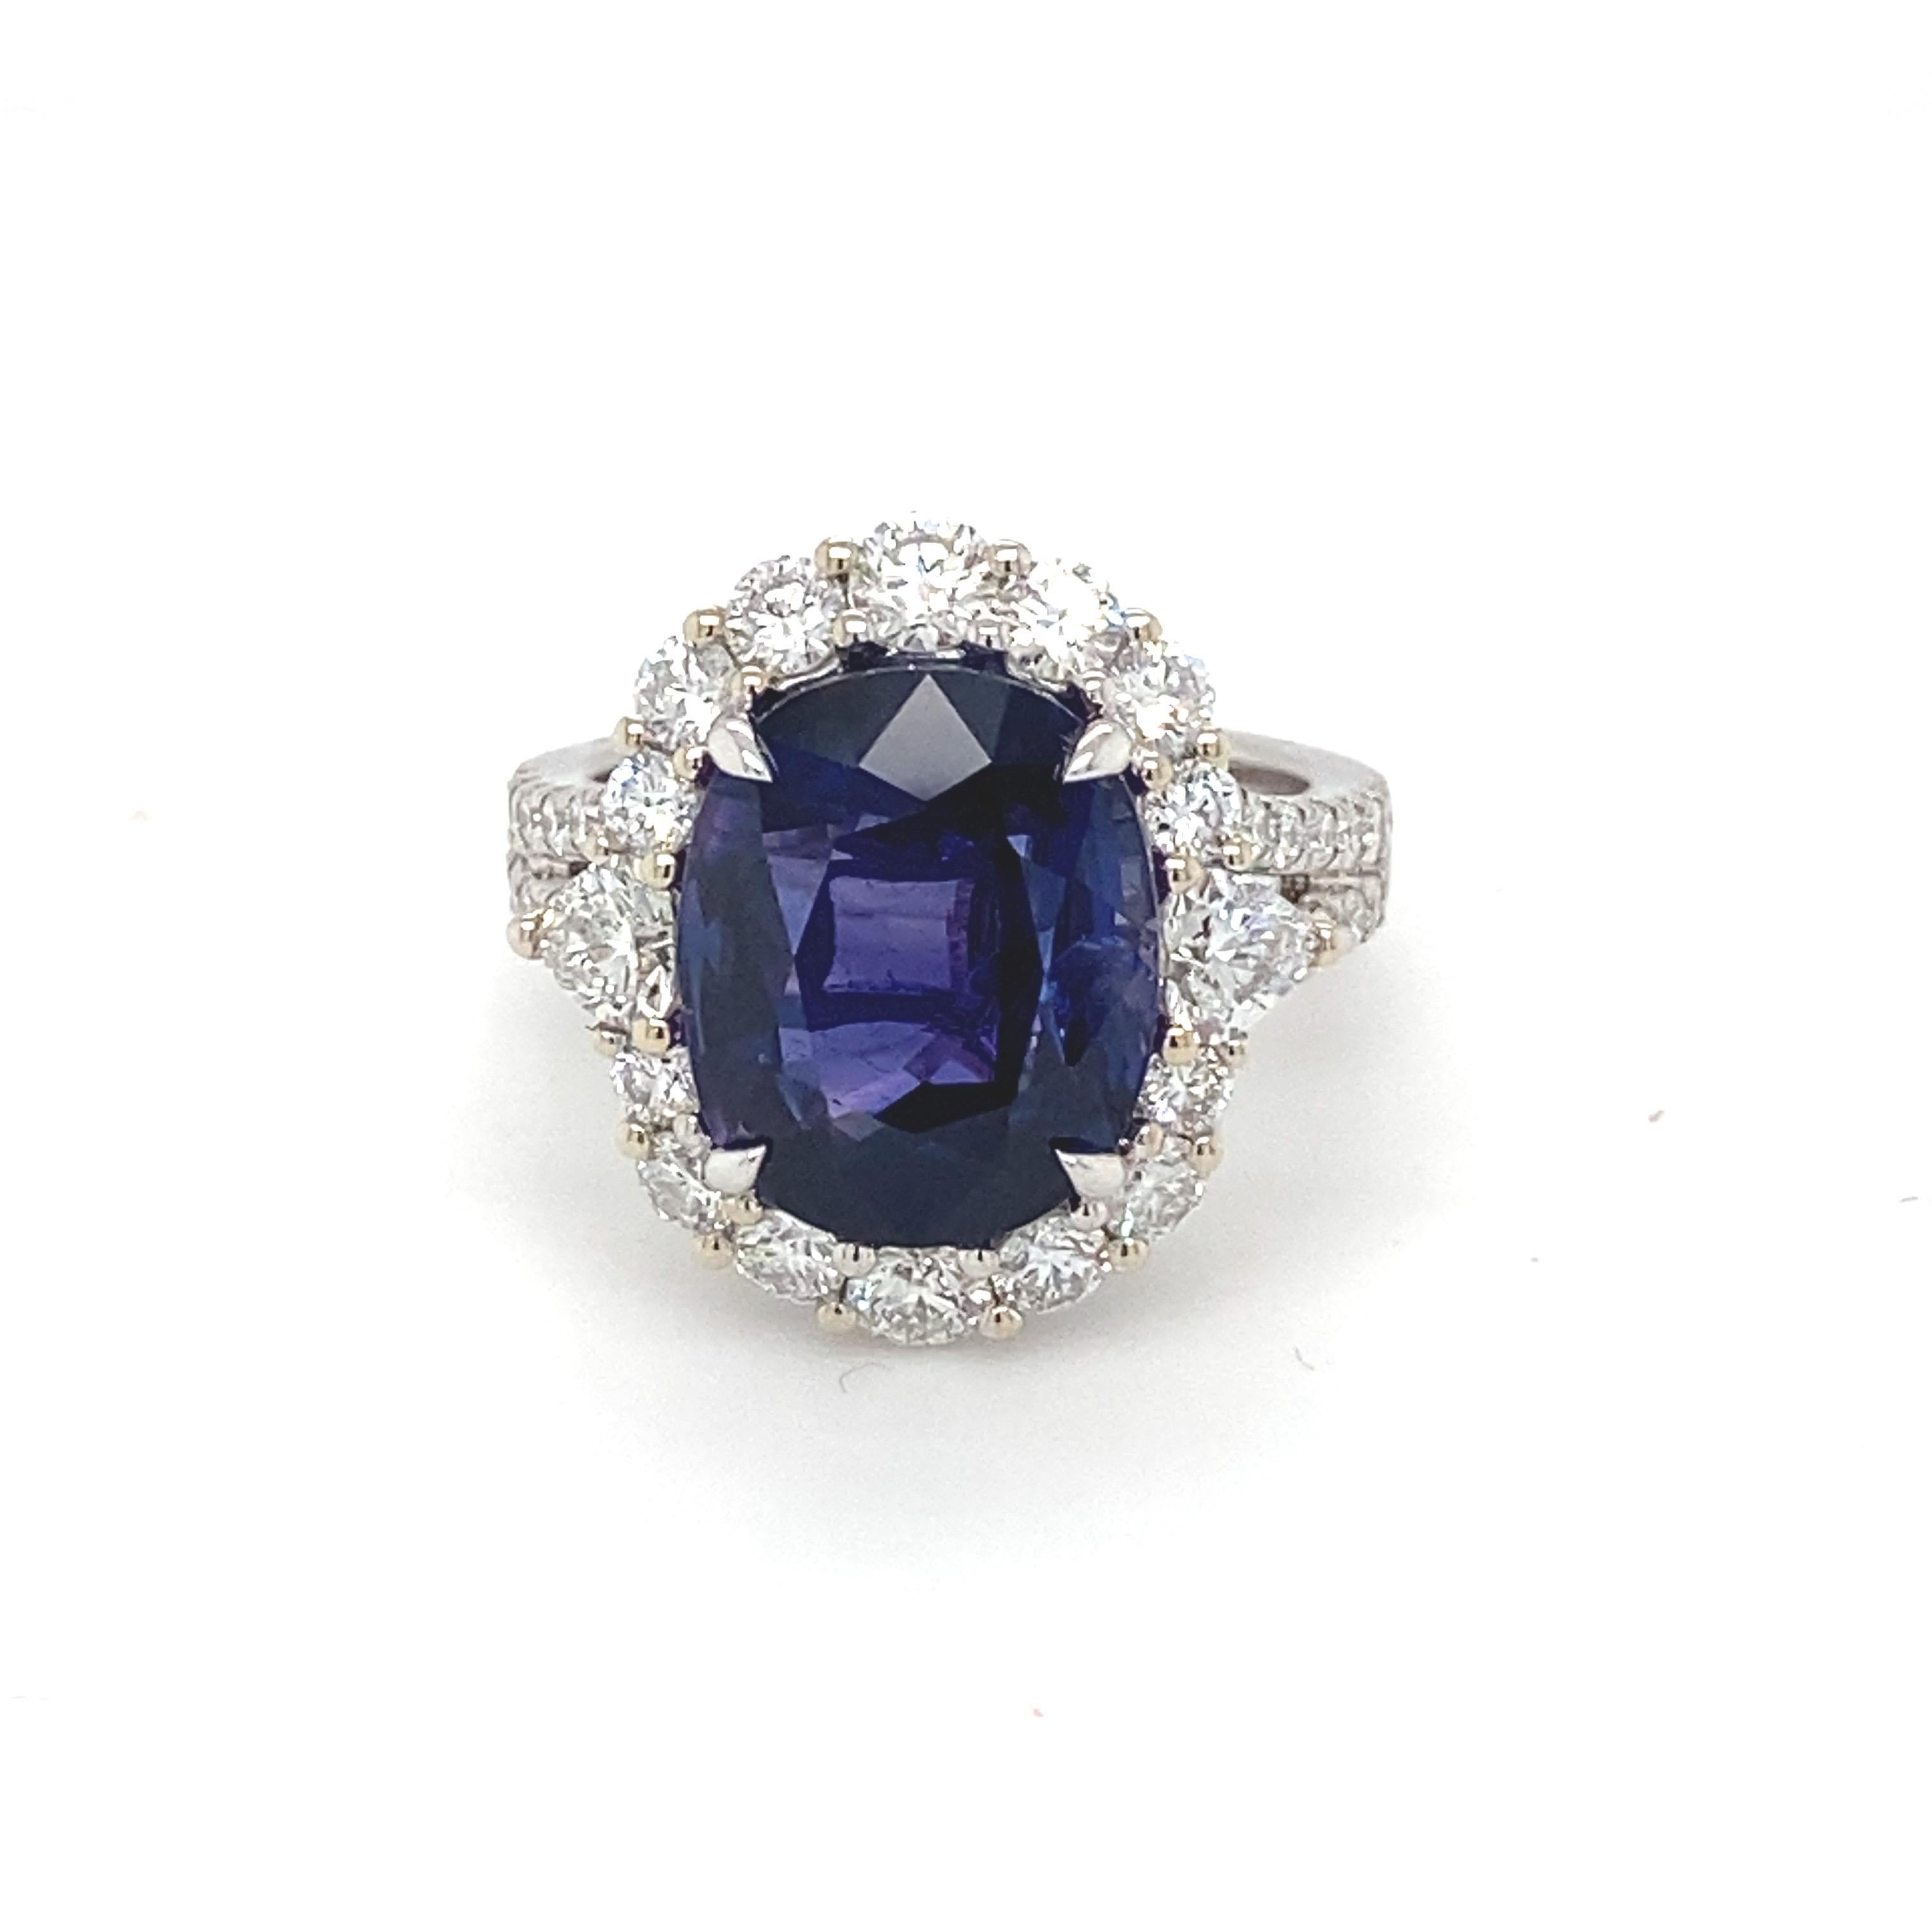 GIA Certified 10.04 Carat Violet Blue Oval Sapphire Diamond Engagement Ring  For Sale 11